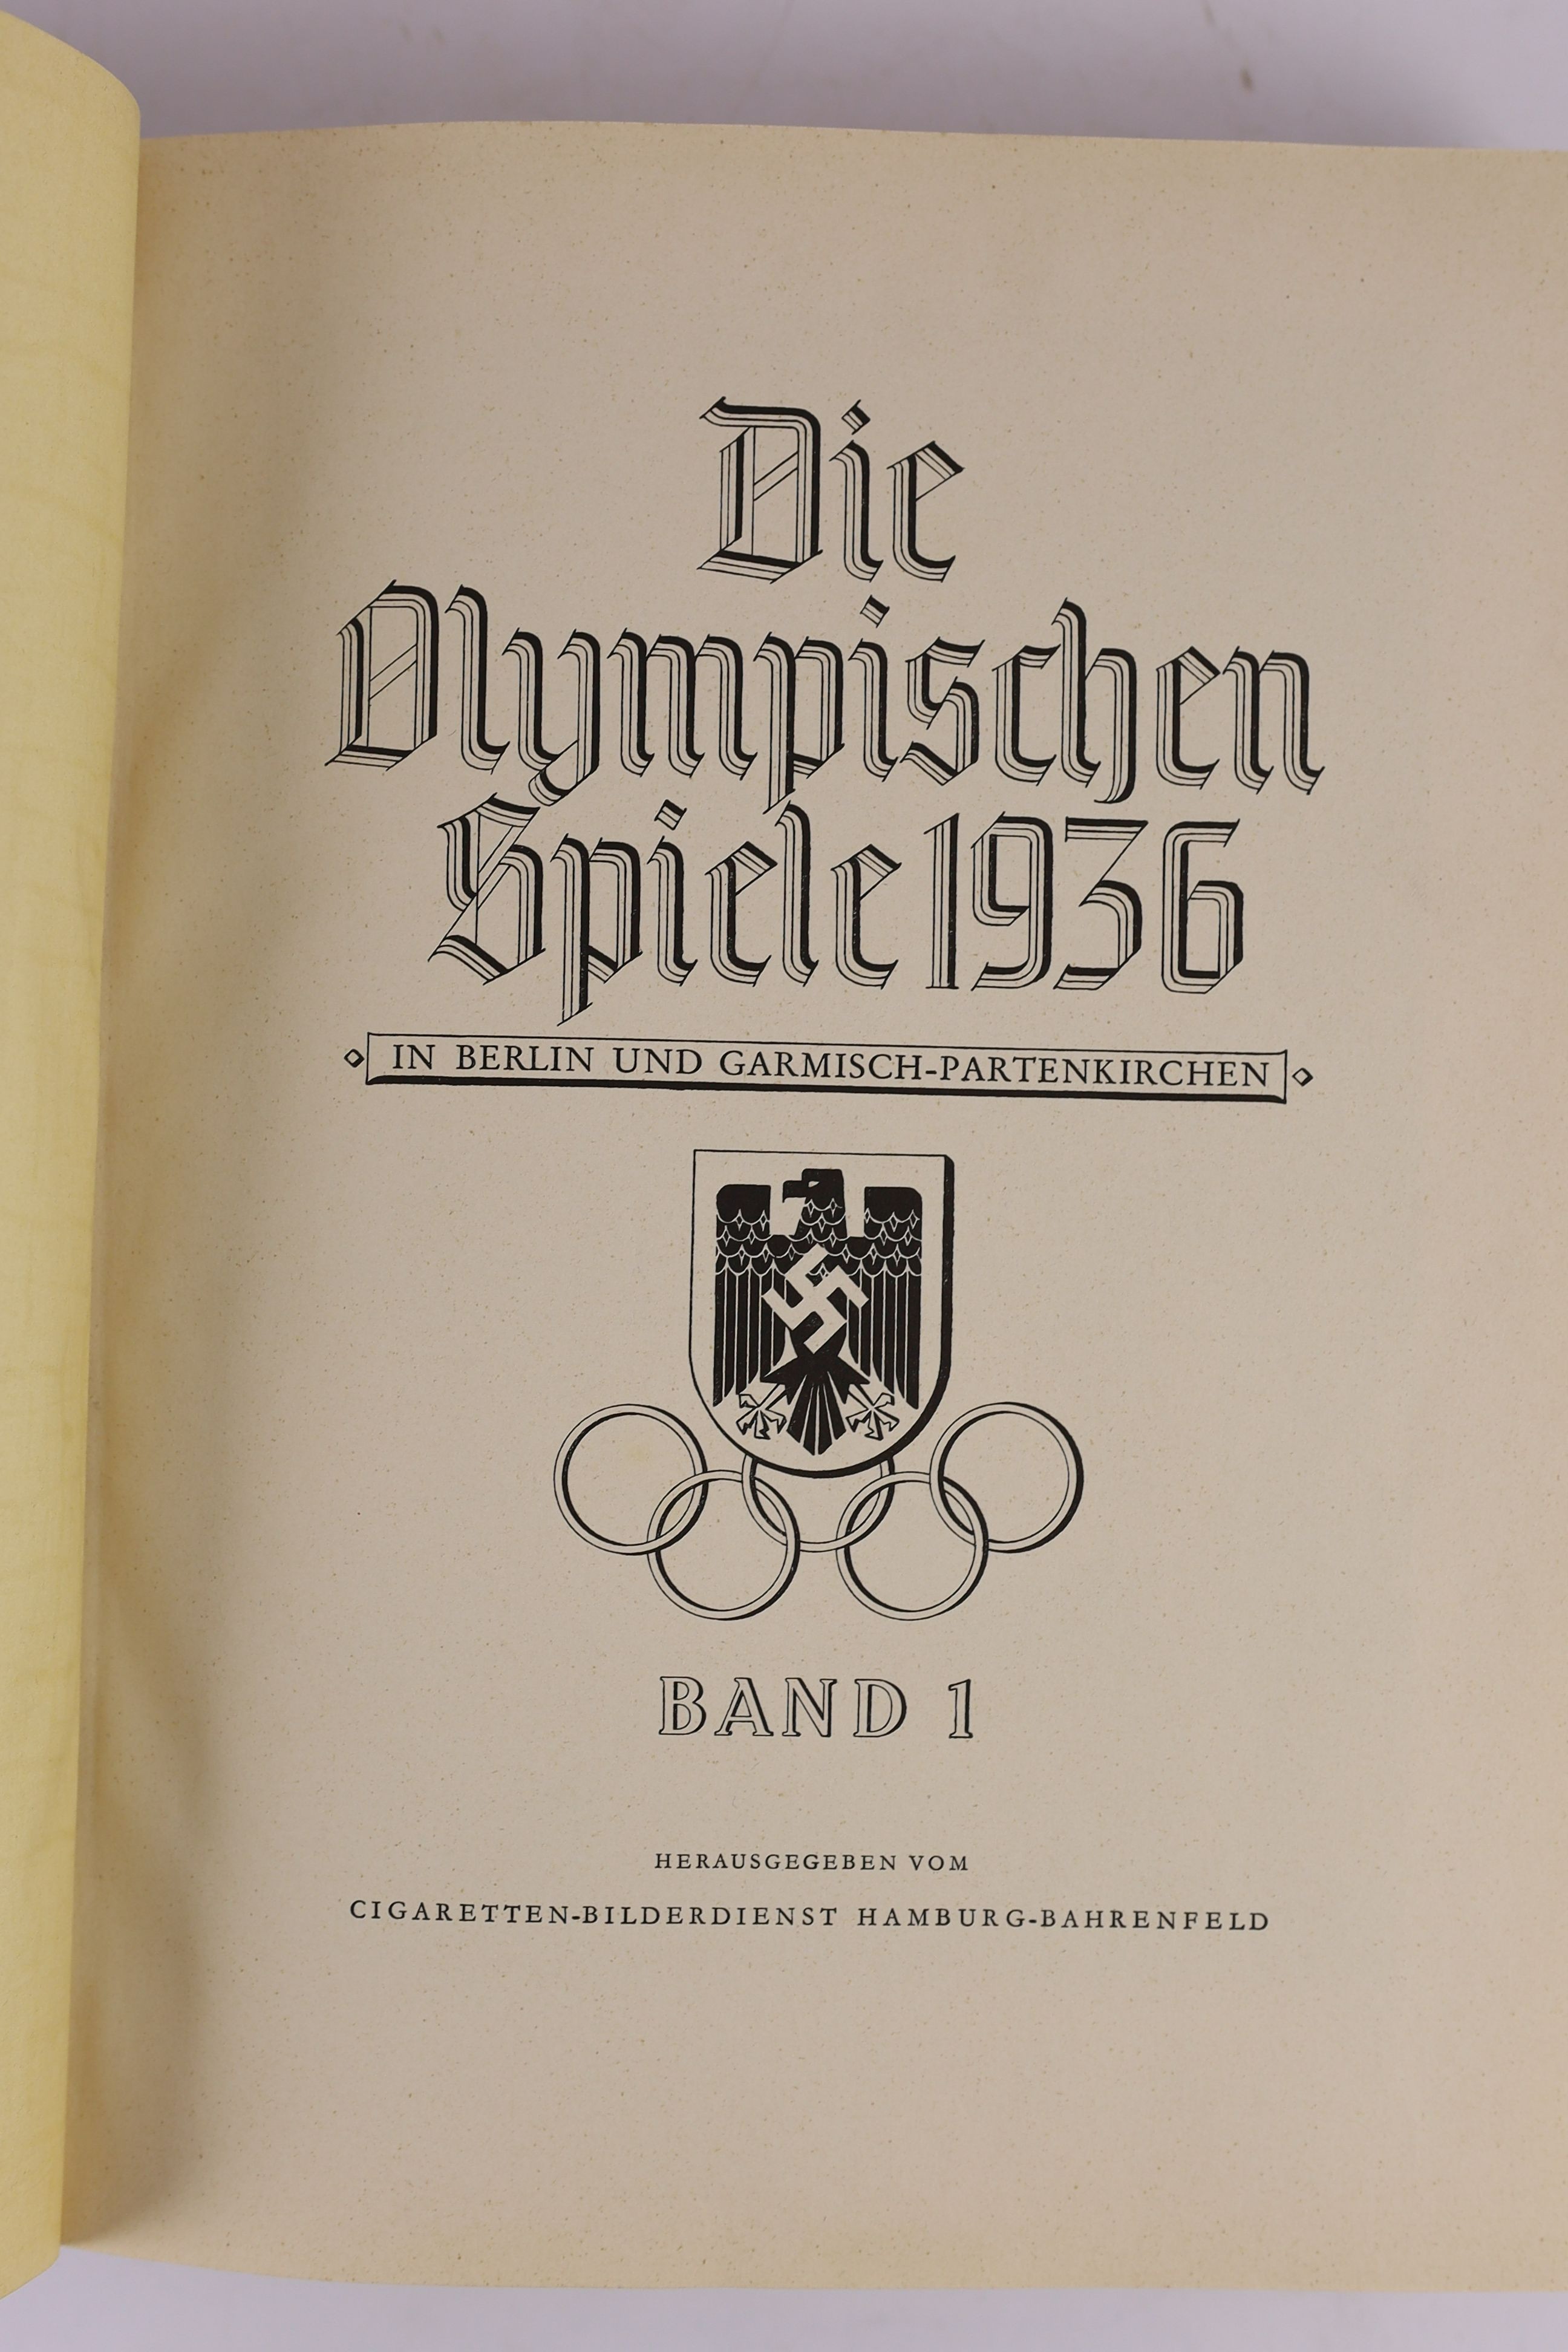 Anon - Die Olympischen Spiele 1936. 1st ed. 2. Vol. Complete with numerous illustrated plates and text illus. Original cloth with unclipped pictorial d/j. Folio. Cigaretten-Bilderdienst, Germany, 1936.